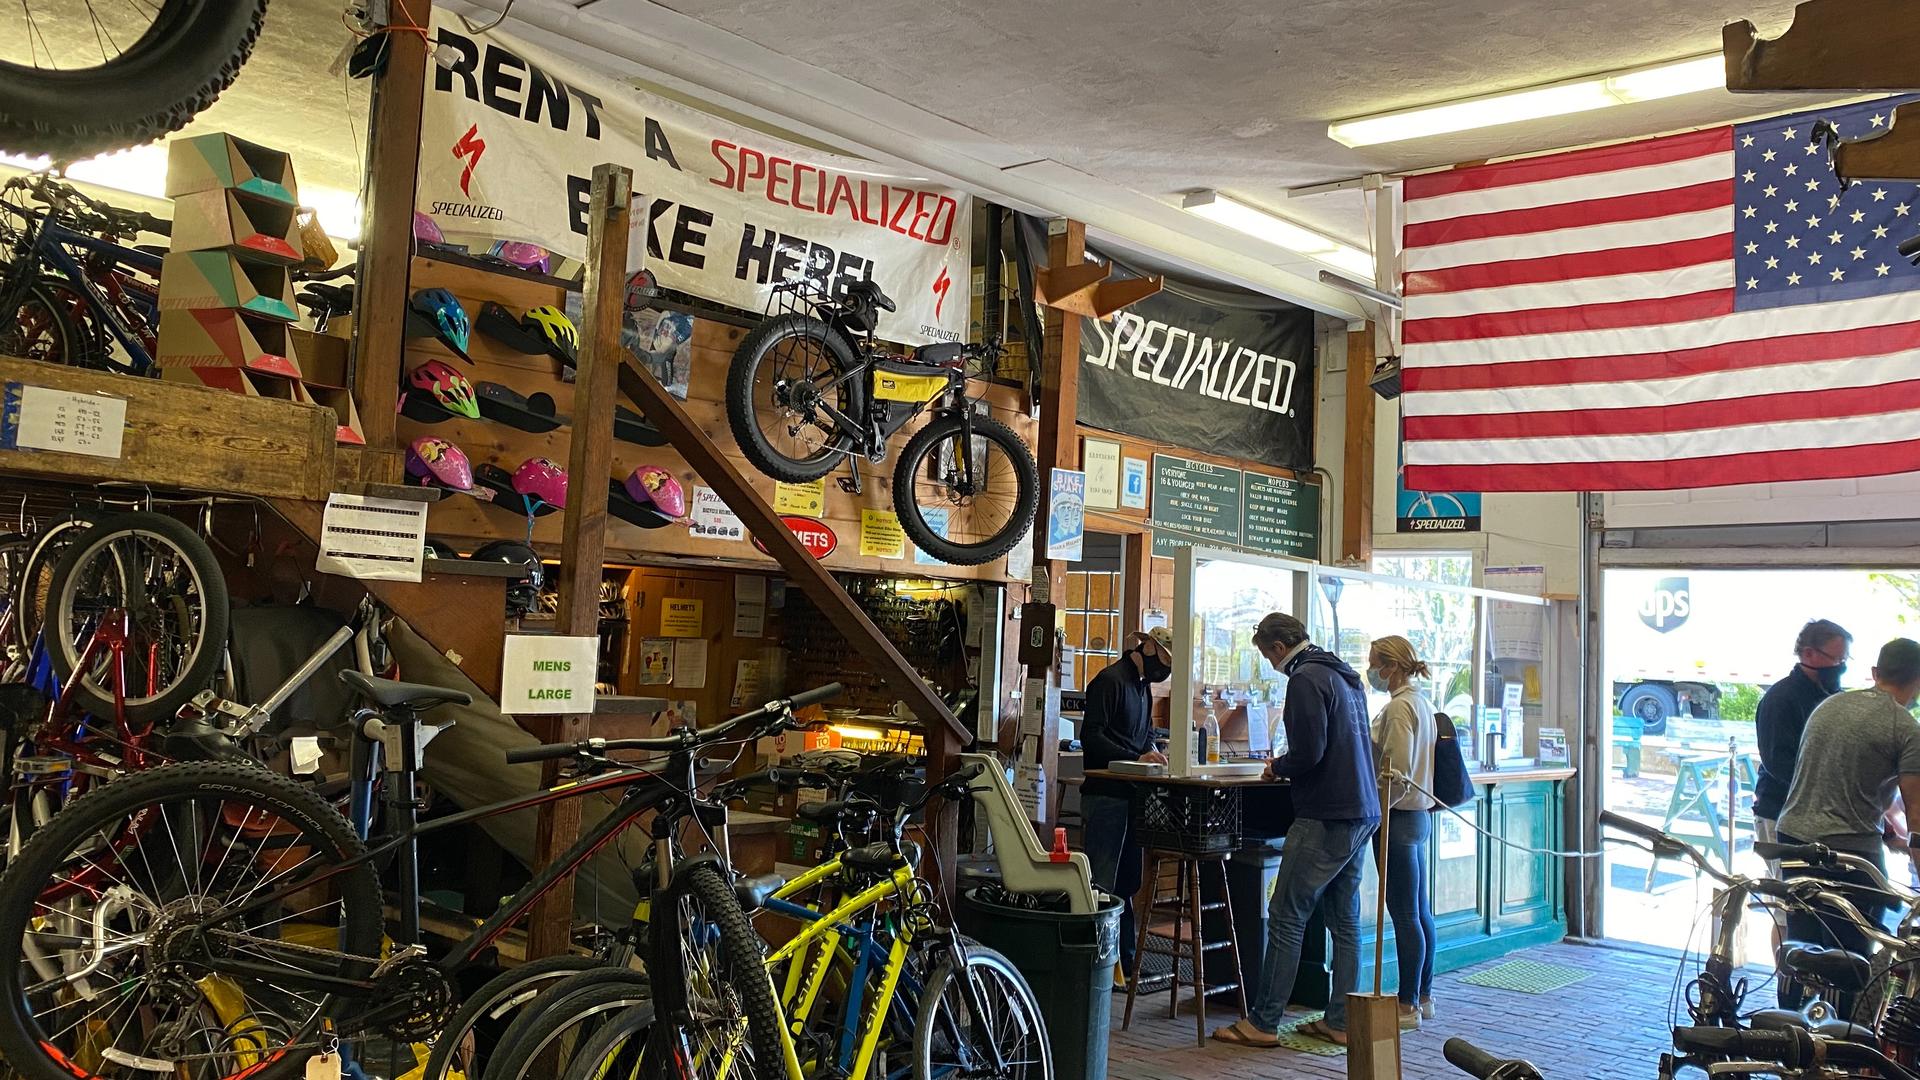 Inside of a bike shop with a large American flag in sunlight 